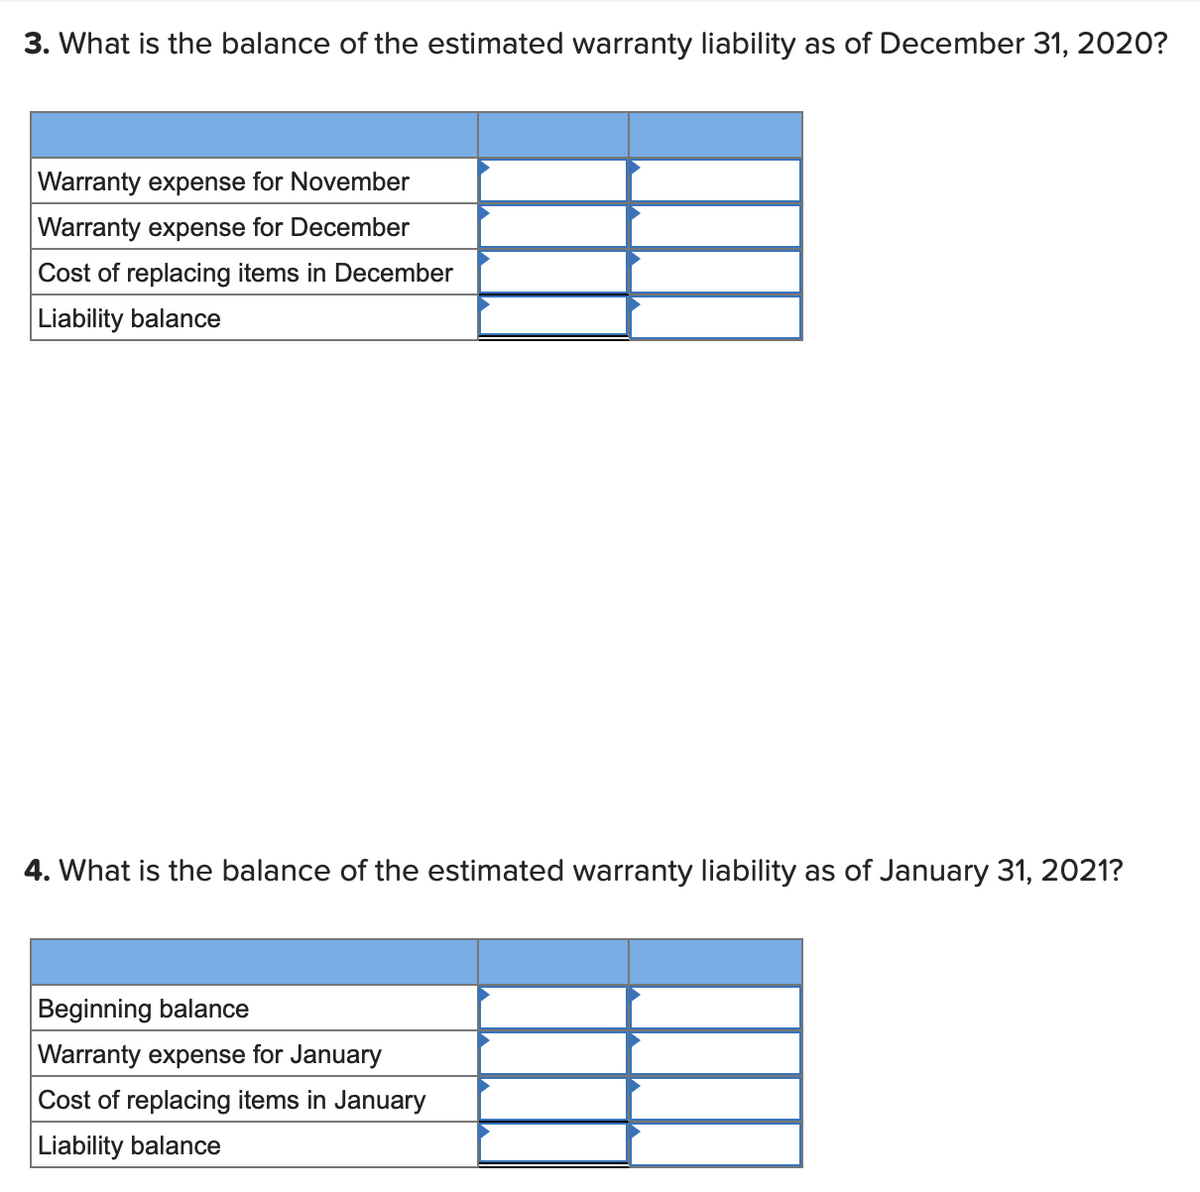 3. What is the balance of the estimated warranty liability as of December 31, 2020?
Warranty expense for November
Warranty expense for December
Cost of replacing items in December
Liability balance
4. What is the balance of the estimated warranty liability as of January 31, 2021?
Beginning balance
Warranty expense for January
Cost of replacing items in January
|Liability balance
